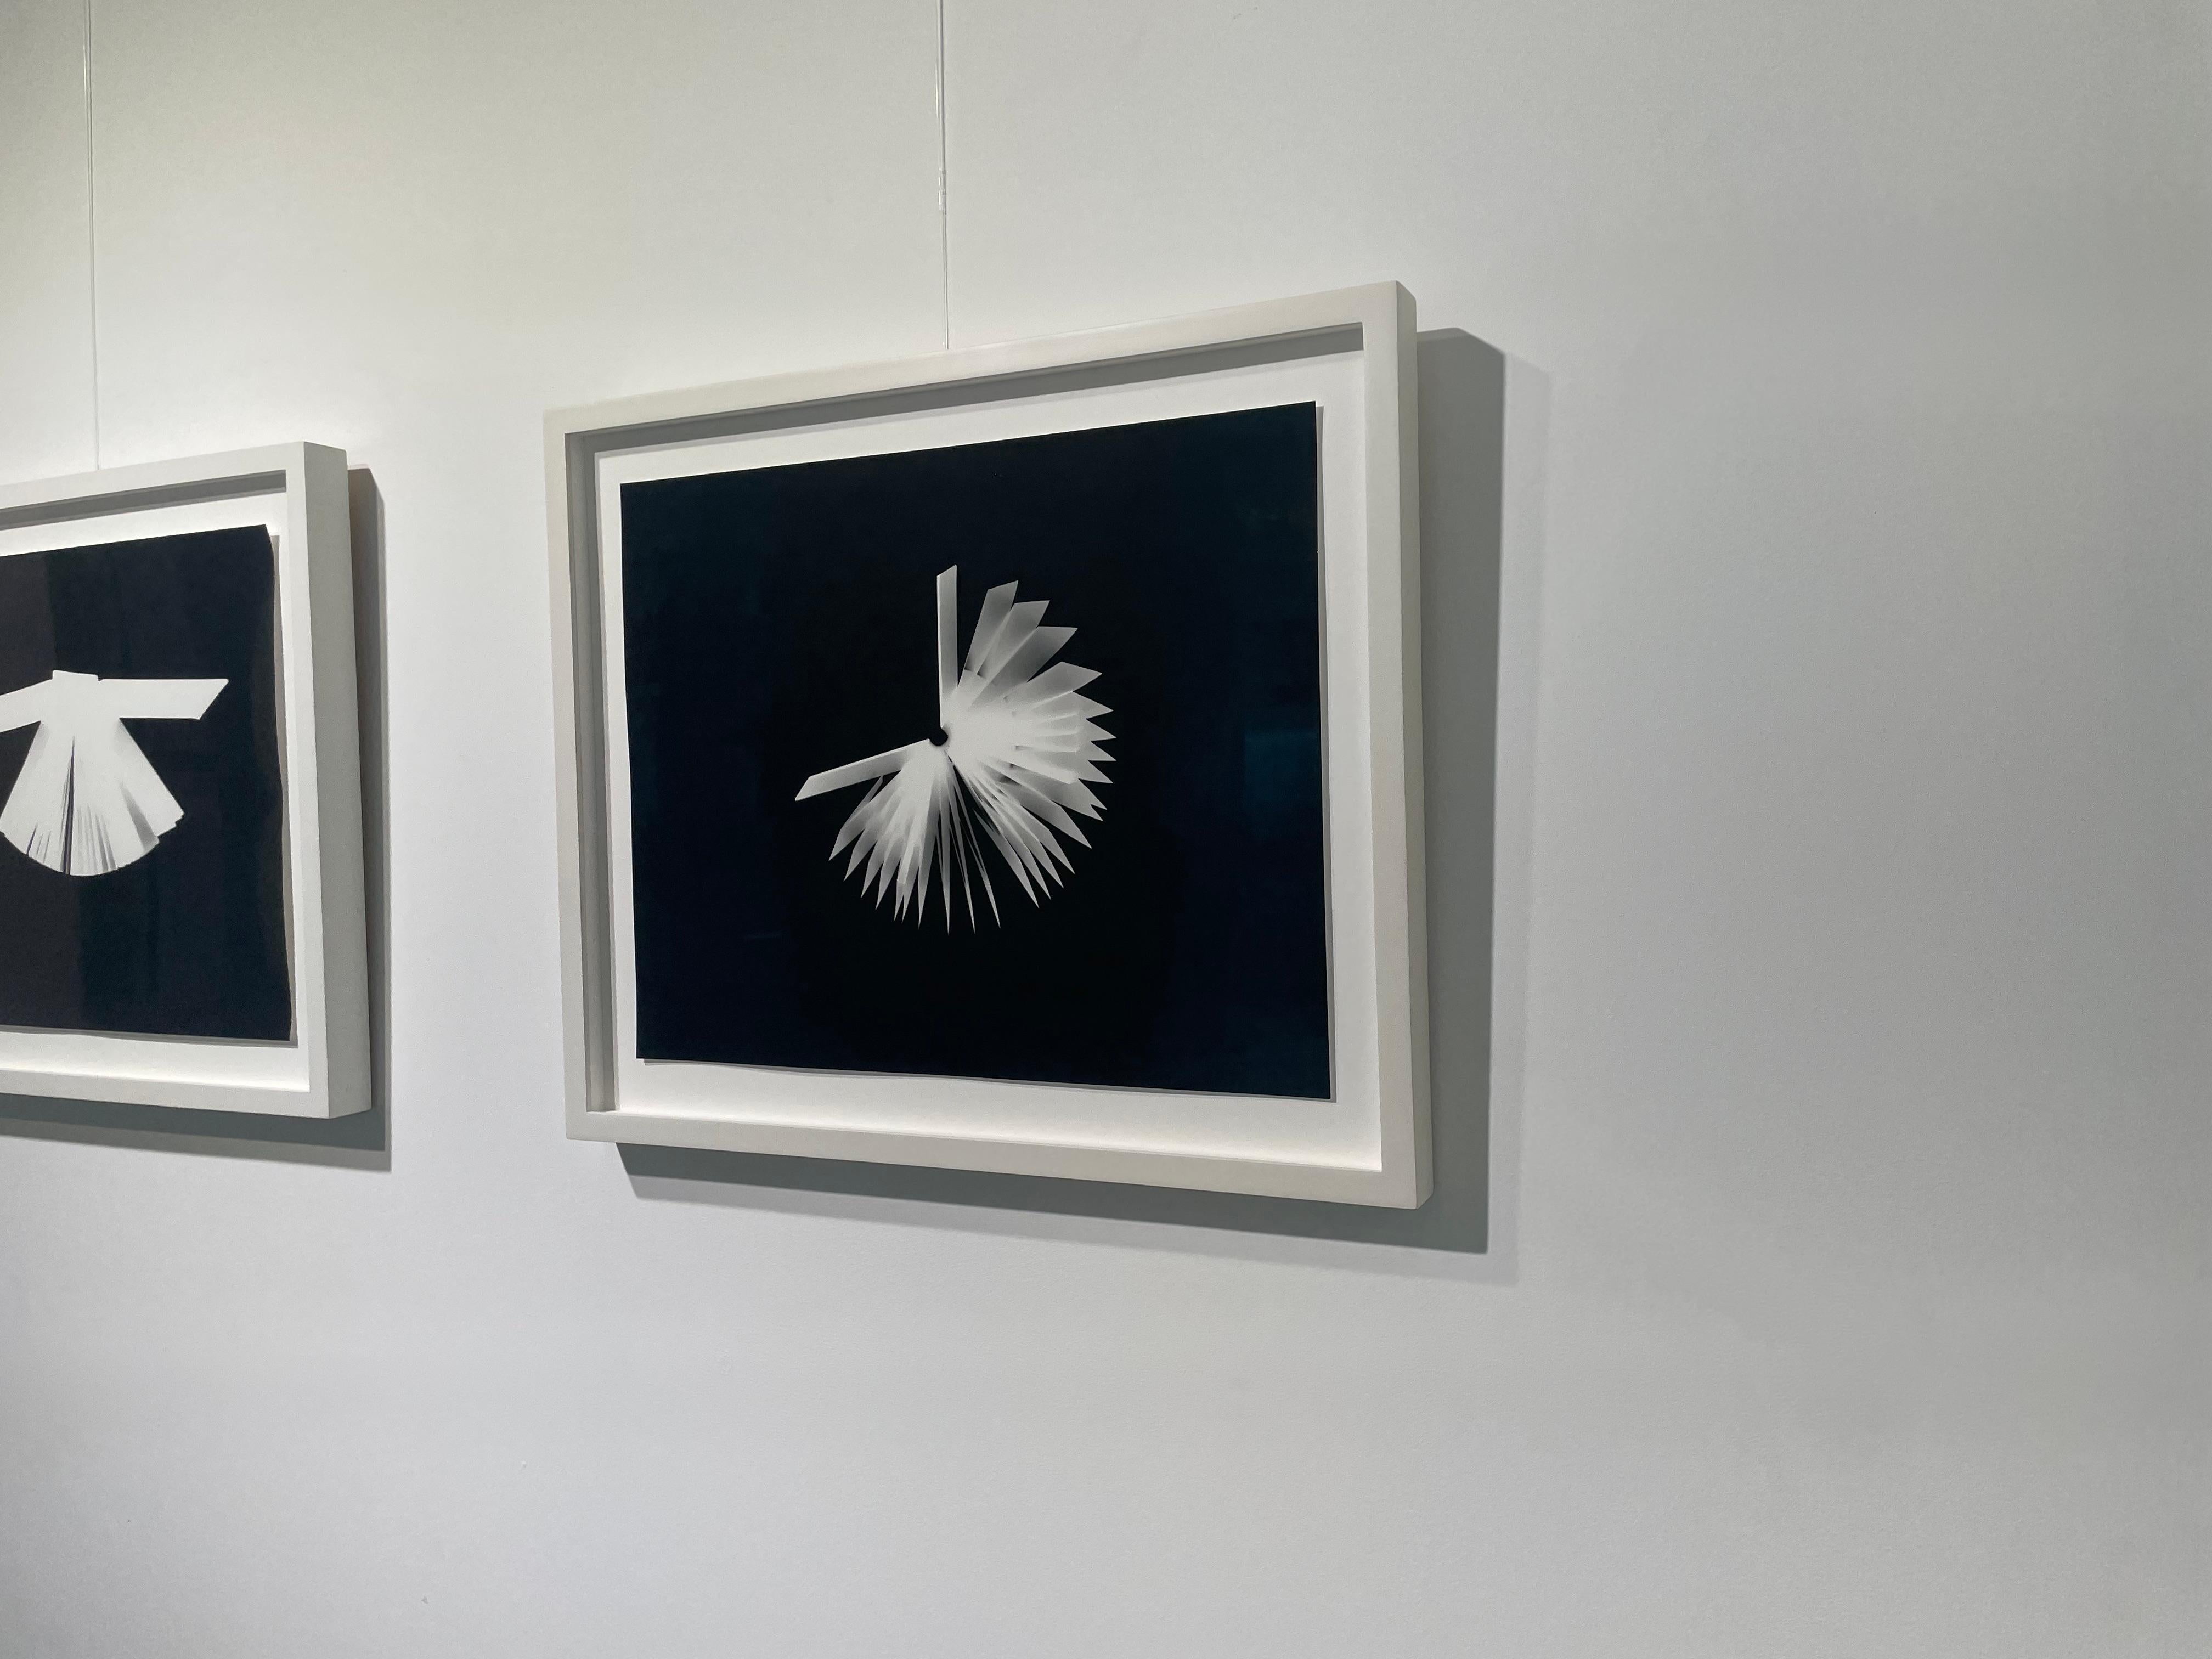 PHOTOGRAMS LITERARY UNITITLED 18 - Contemporary Photograph by Wendy Paton